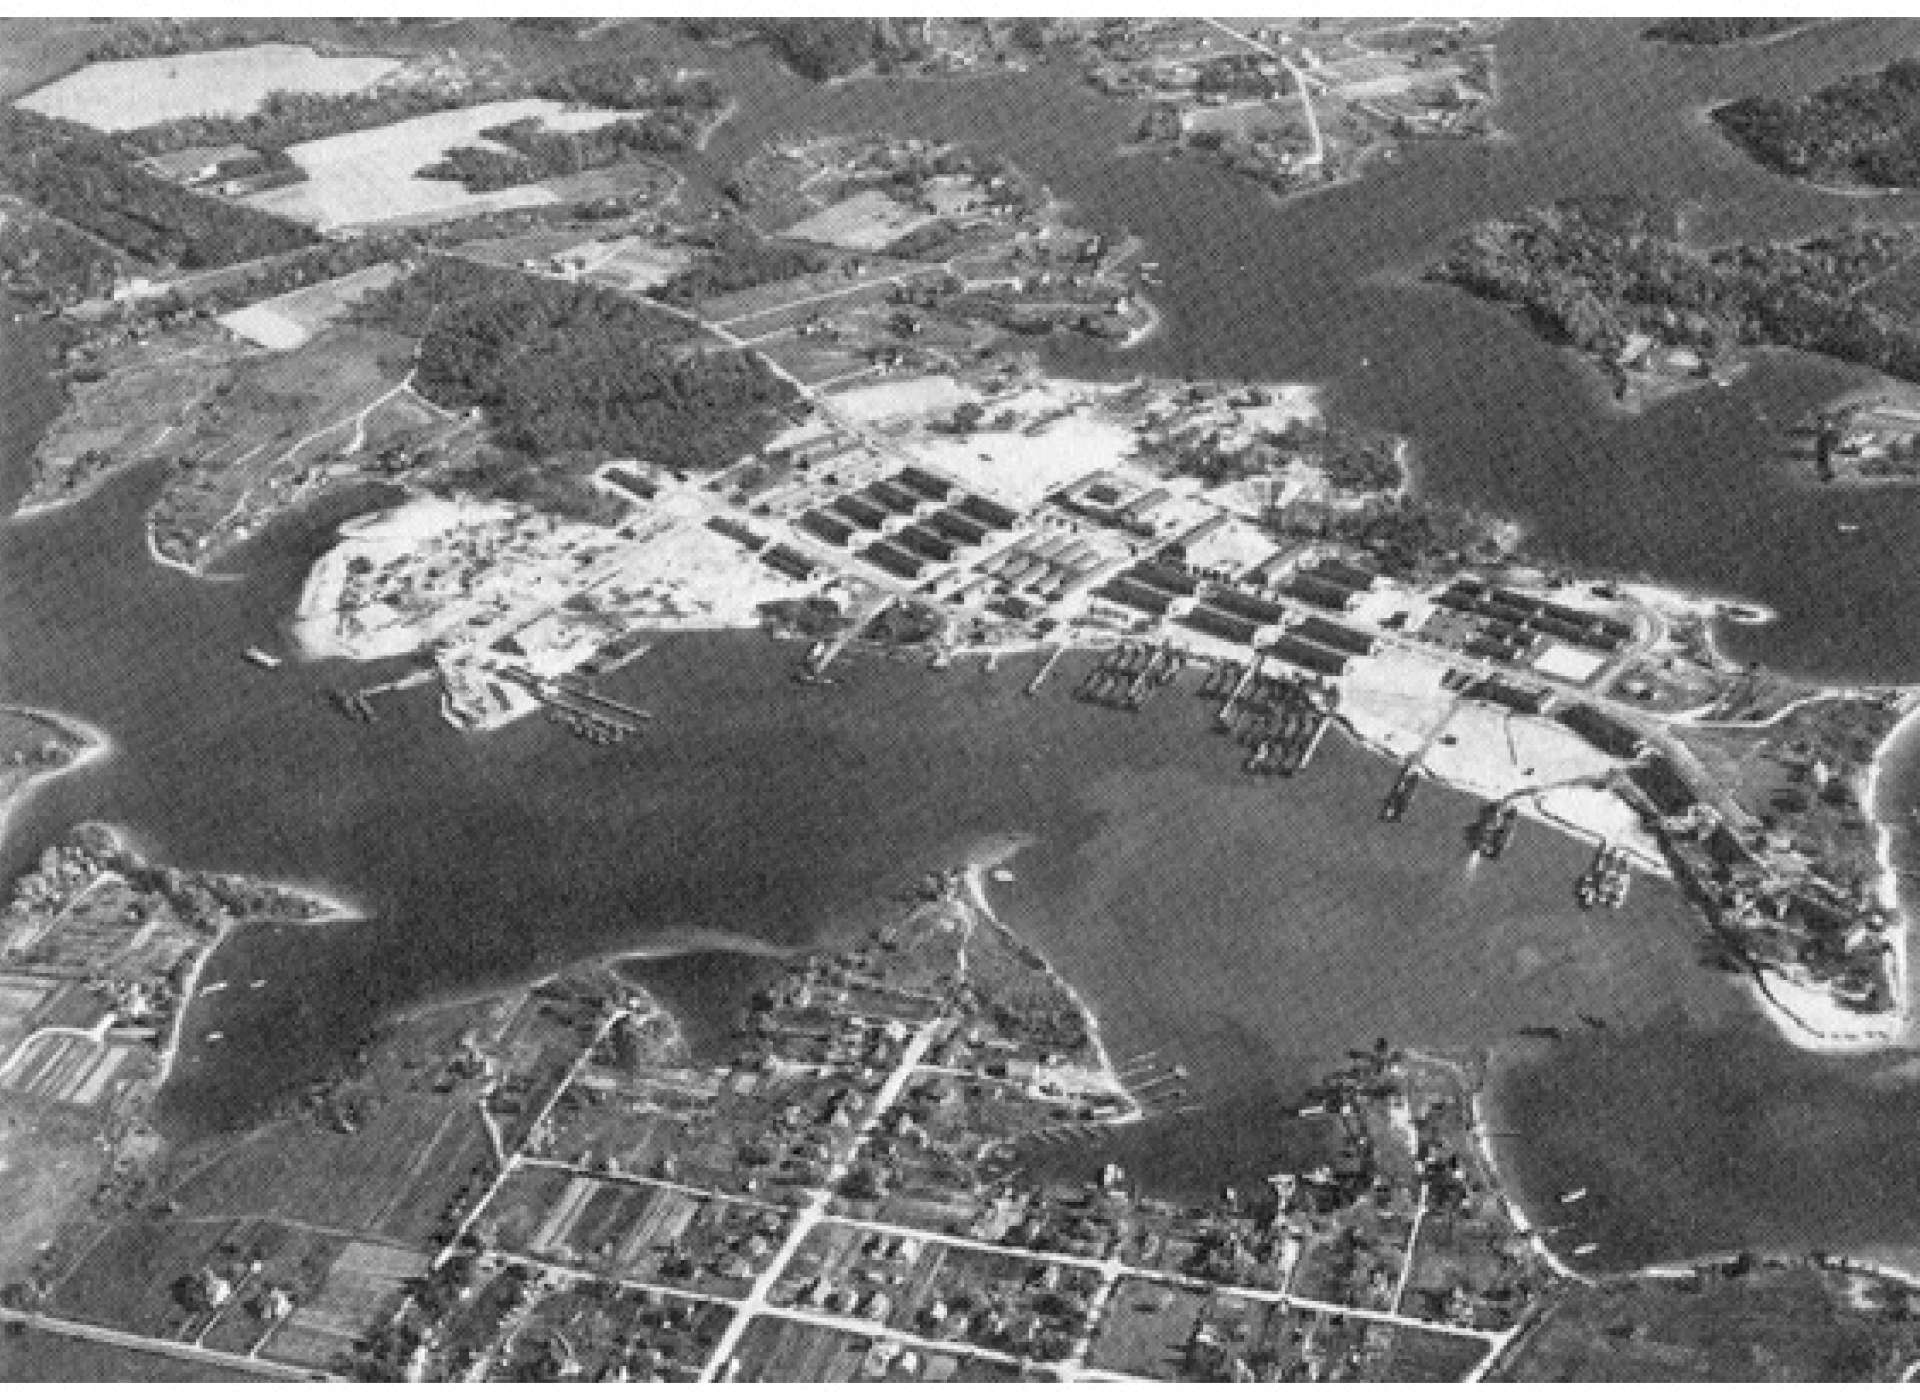 Solomon’s Island Amphibious Training Base Maryland. Termed the “Cradle of Invasions,” this was an important link in the development of American amphibious capabilities in the European Theater of Operations during World War II. (National Archives)